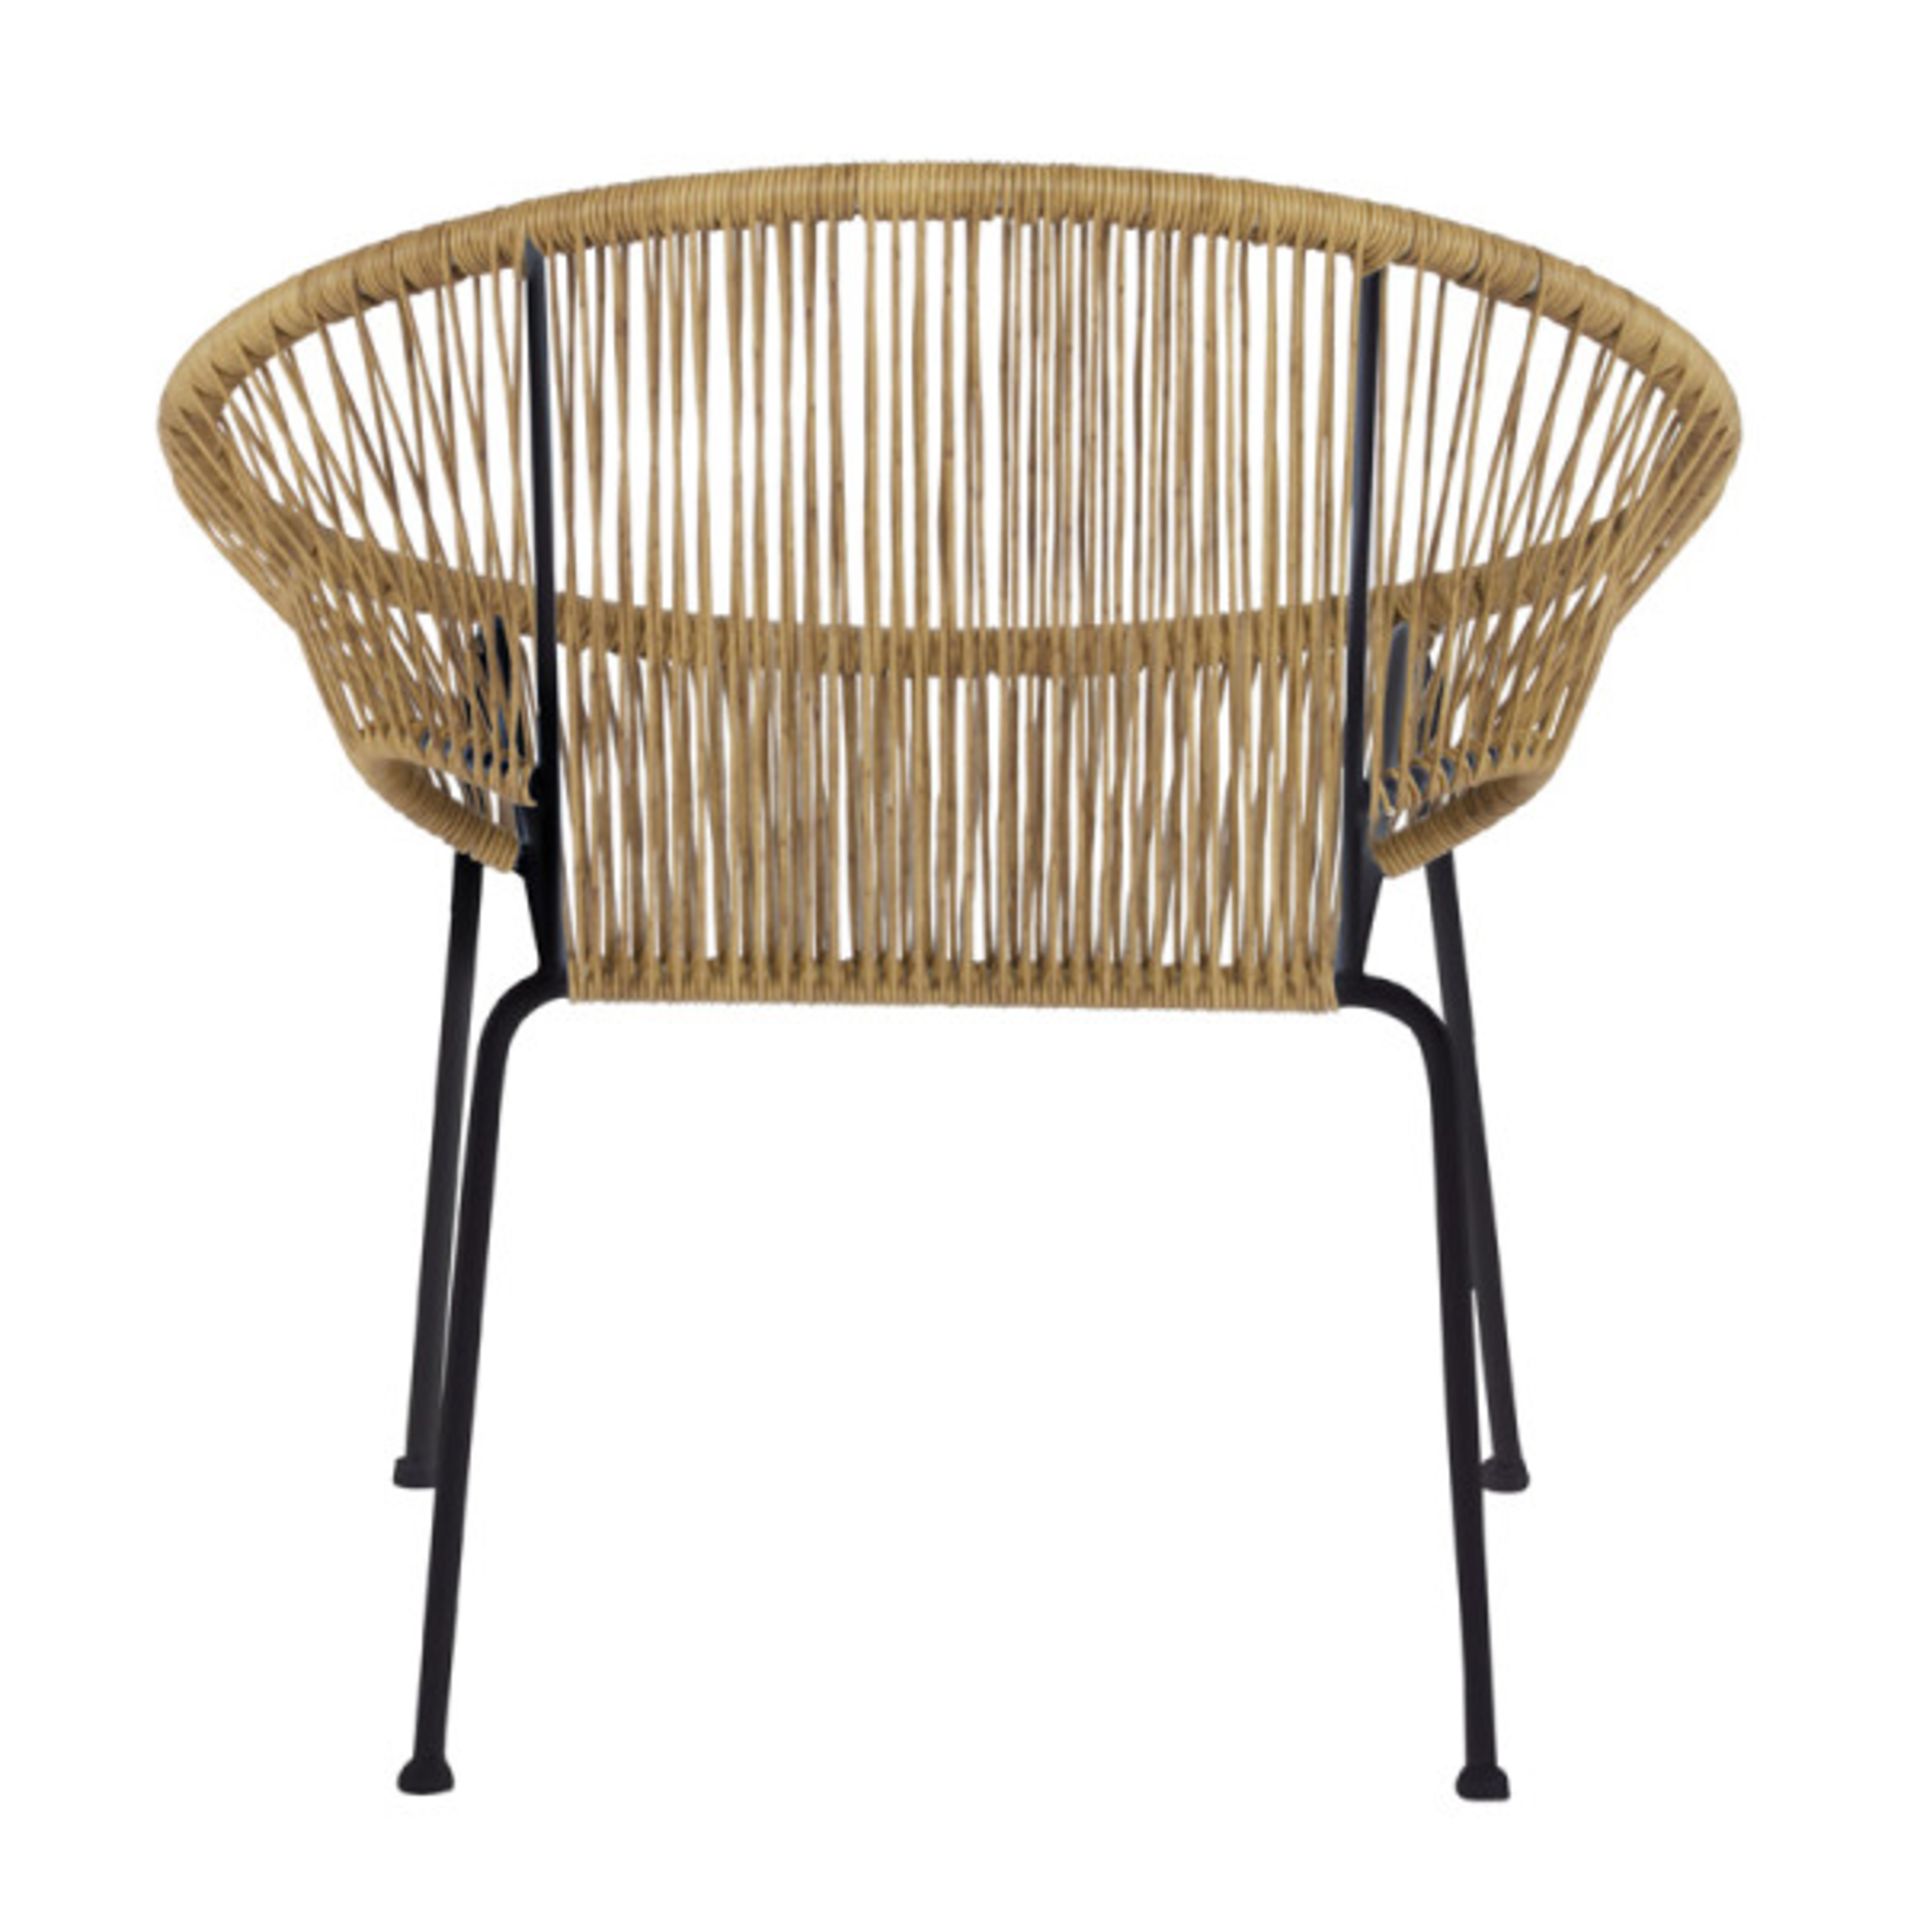 1 x  LUCCA Designer Rattan Chair By Woood Design - Dimensions: Height: 73cm x Length: 69cm x - Image 2 of 3